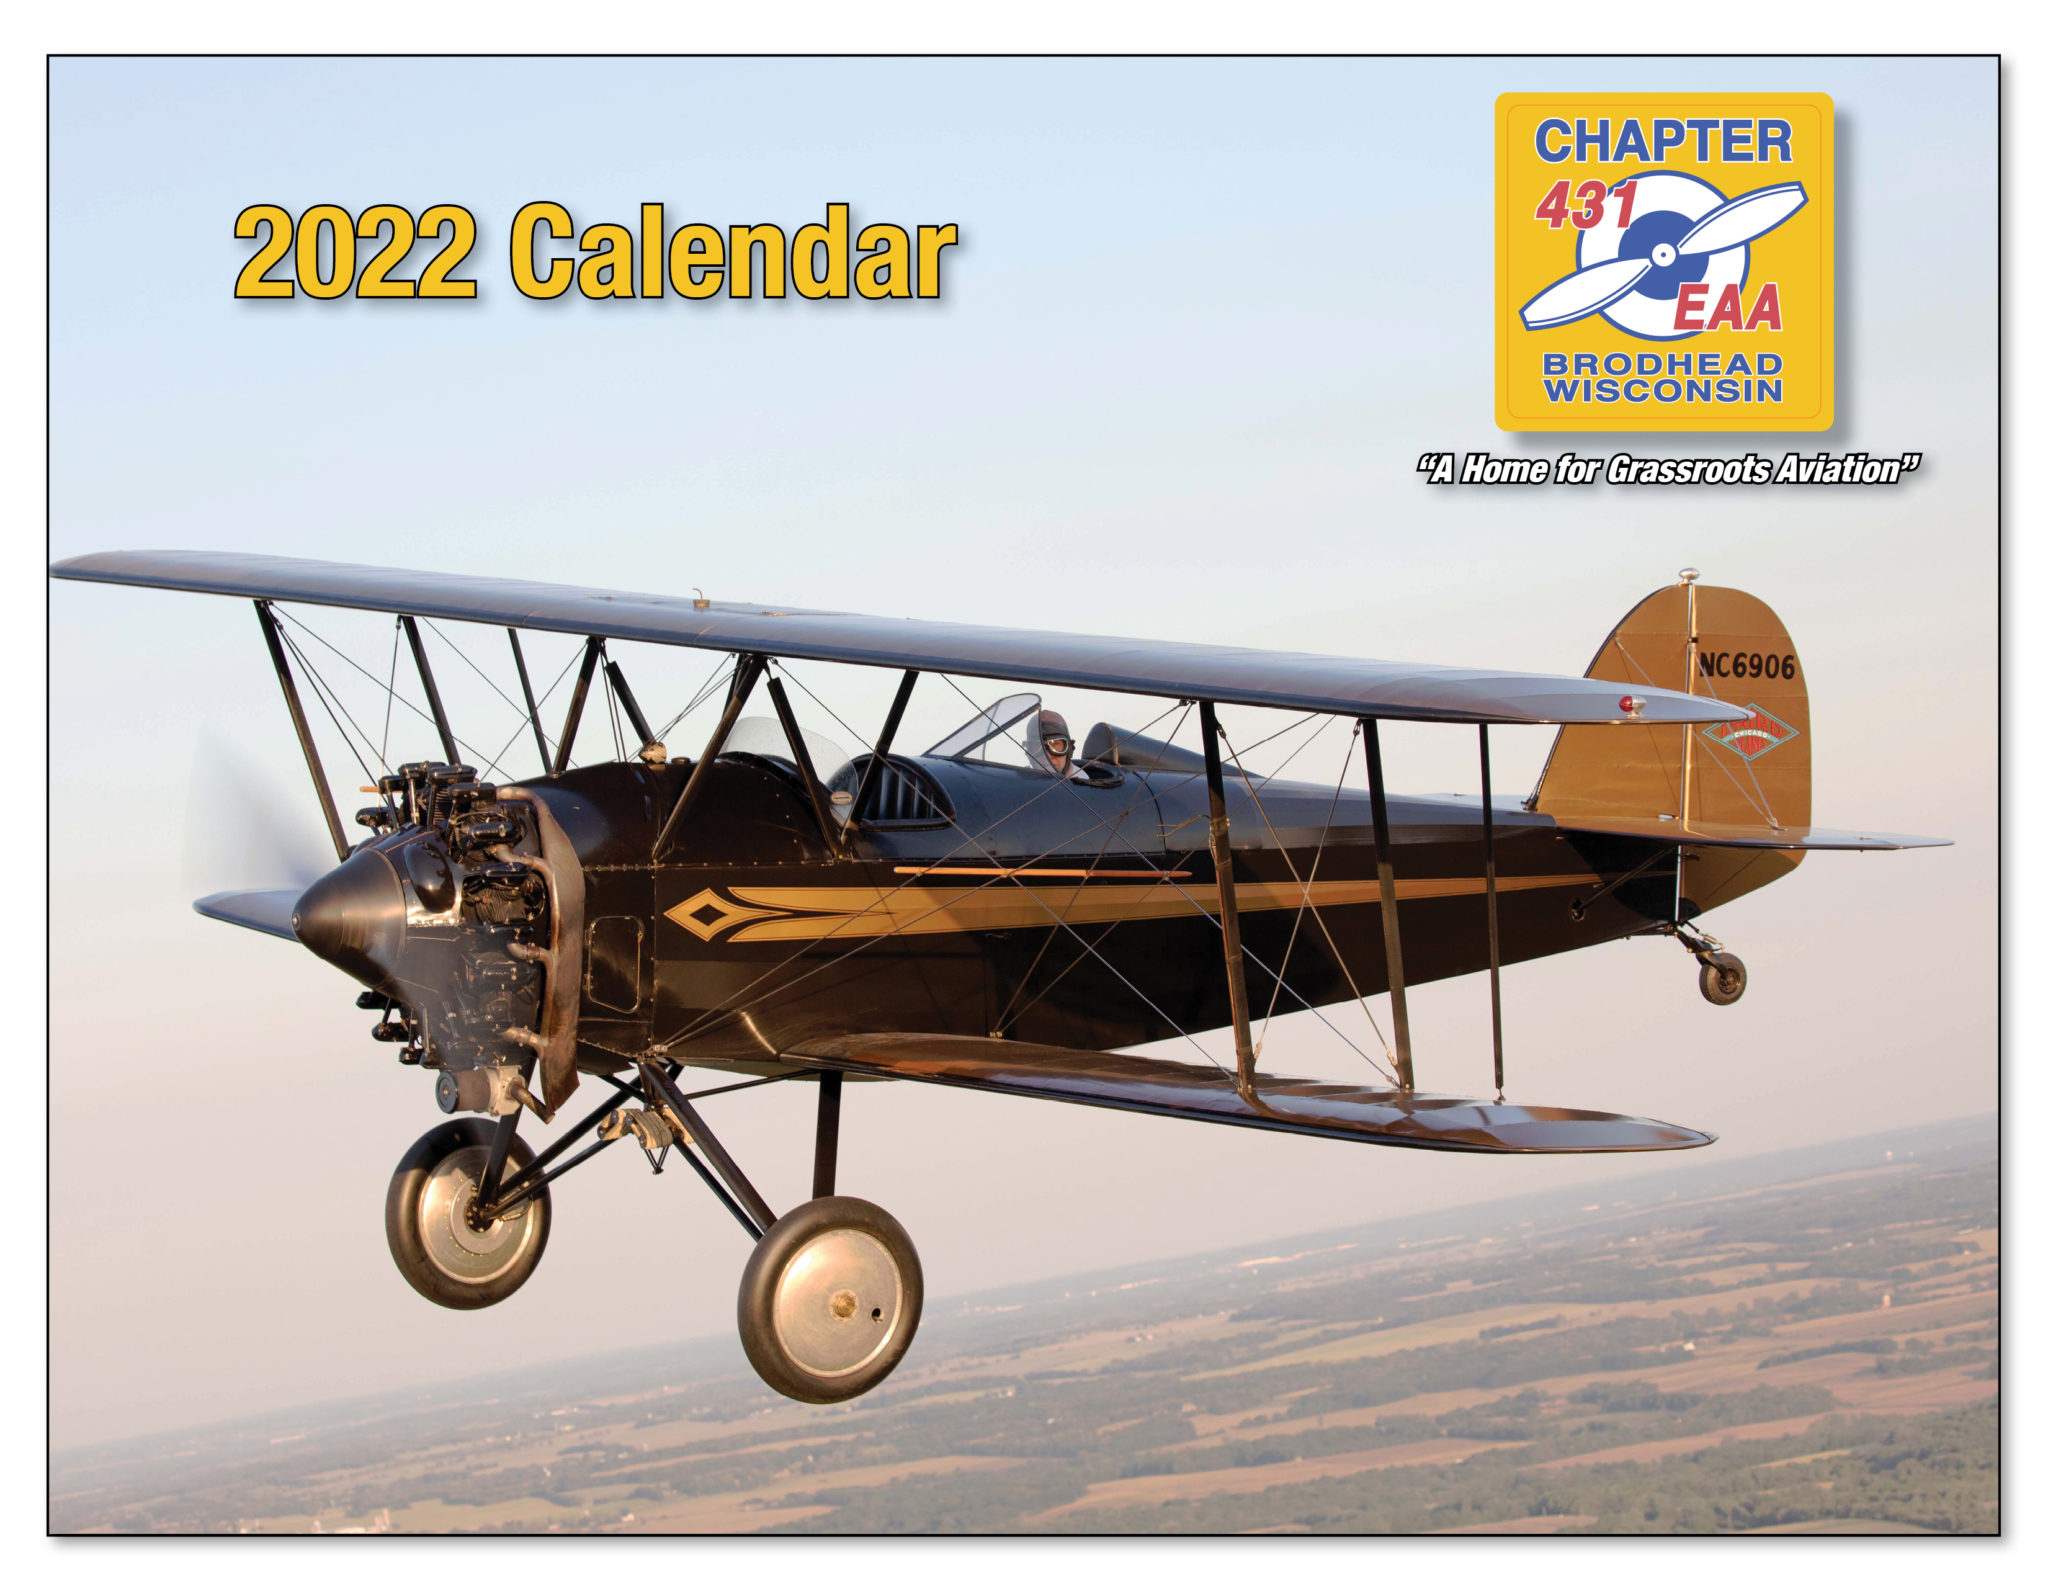 2022 Brodhead Airport Calendars Available | Cheeseland Chapter EAA 431 - Brodhead, Wisconsin